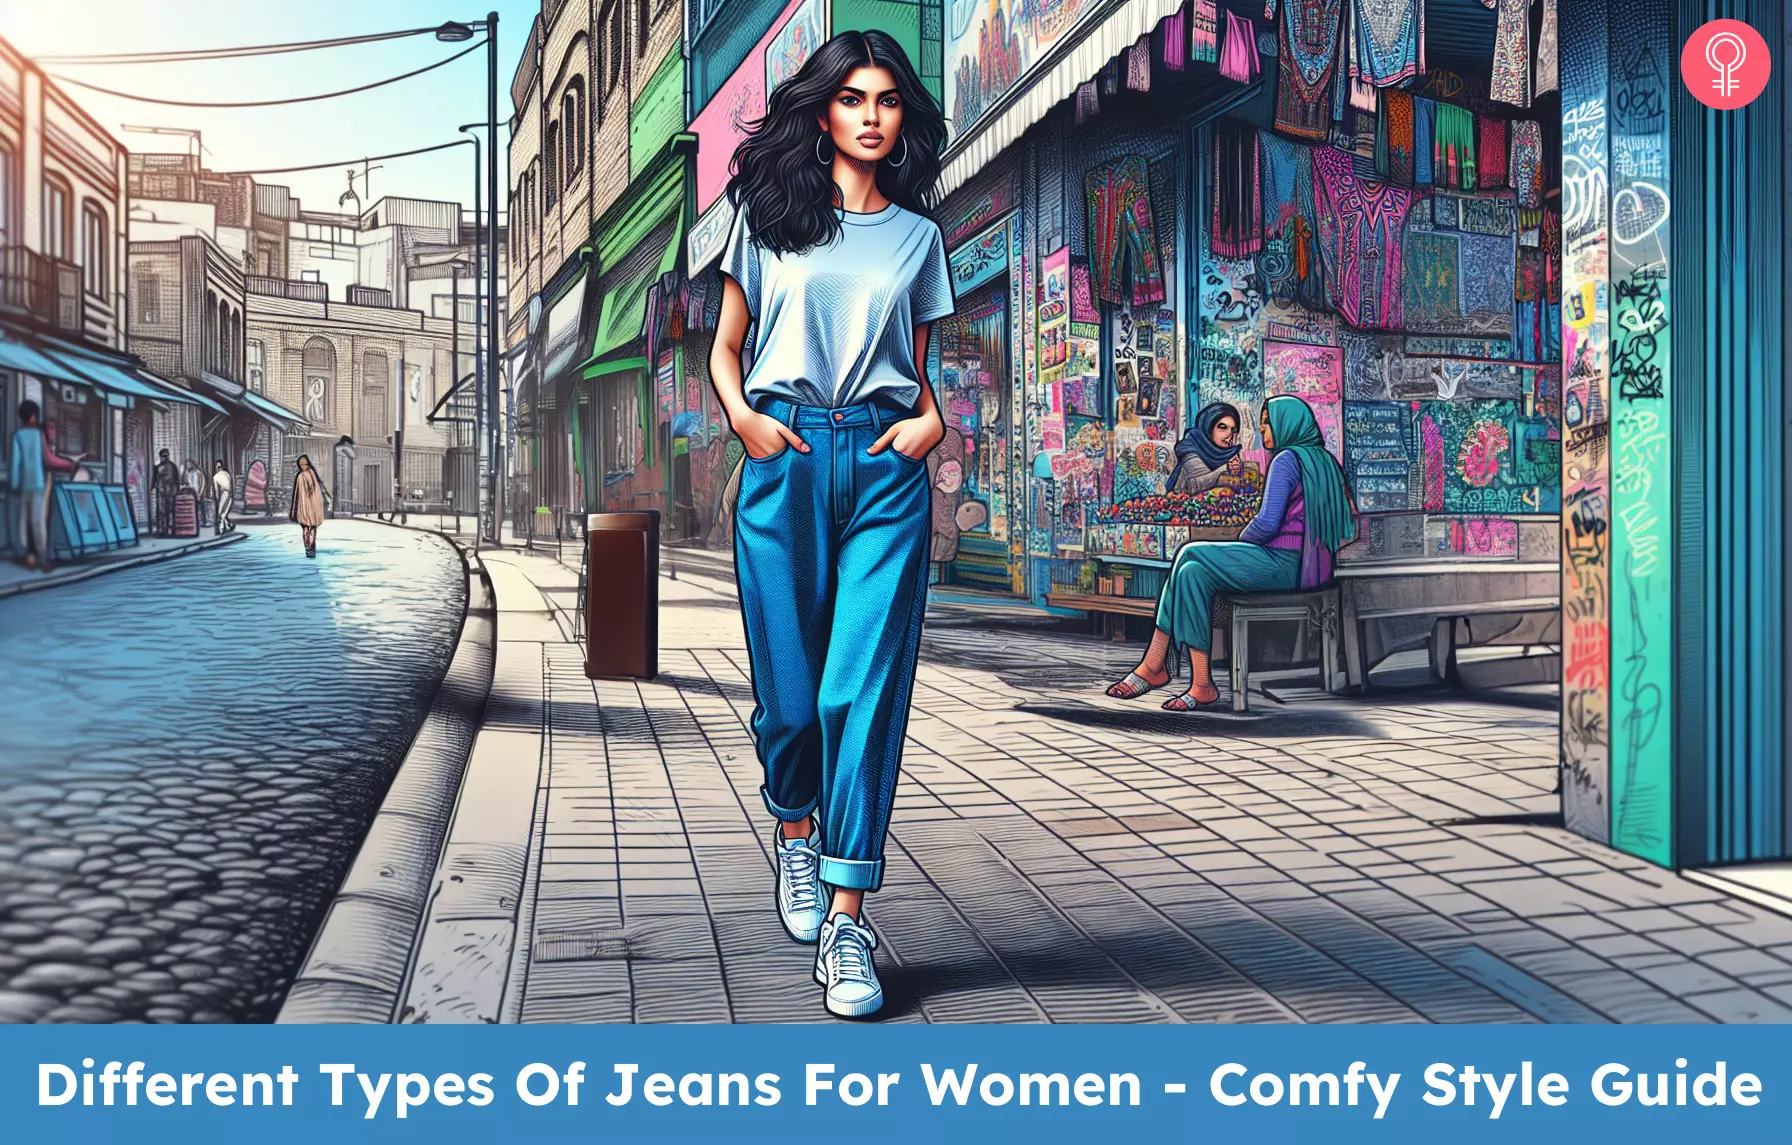 10 Different Types Of Jeans For Women - Comfy Style Guide